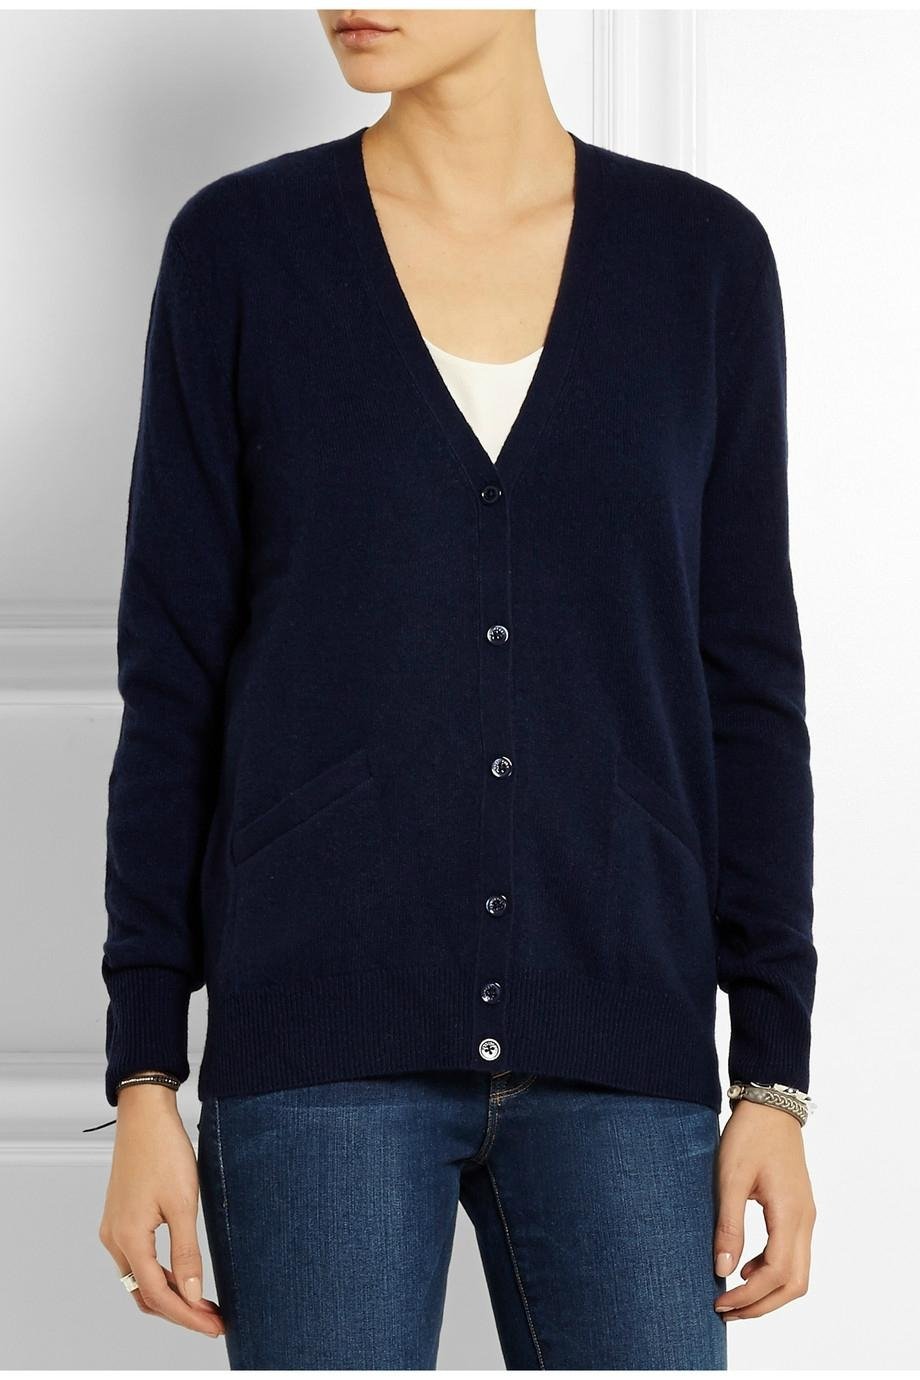 new fashion cashmere knitted cardigan   